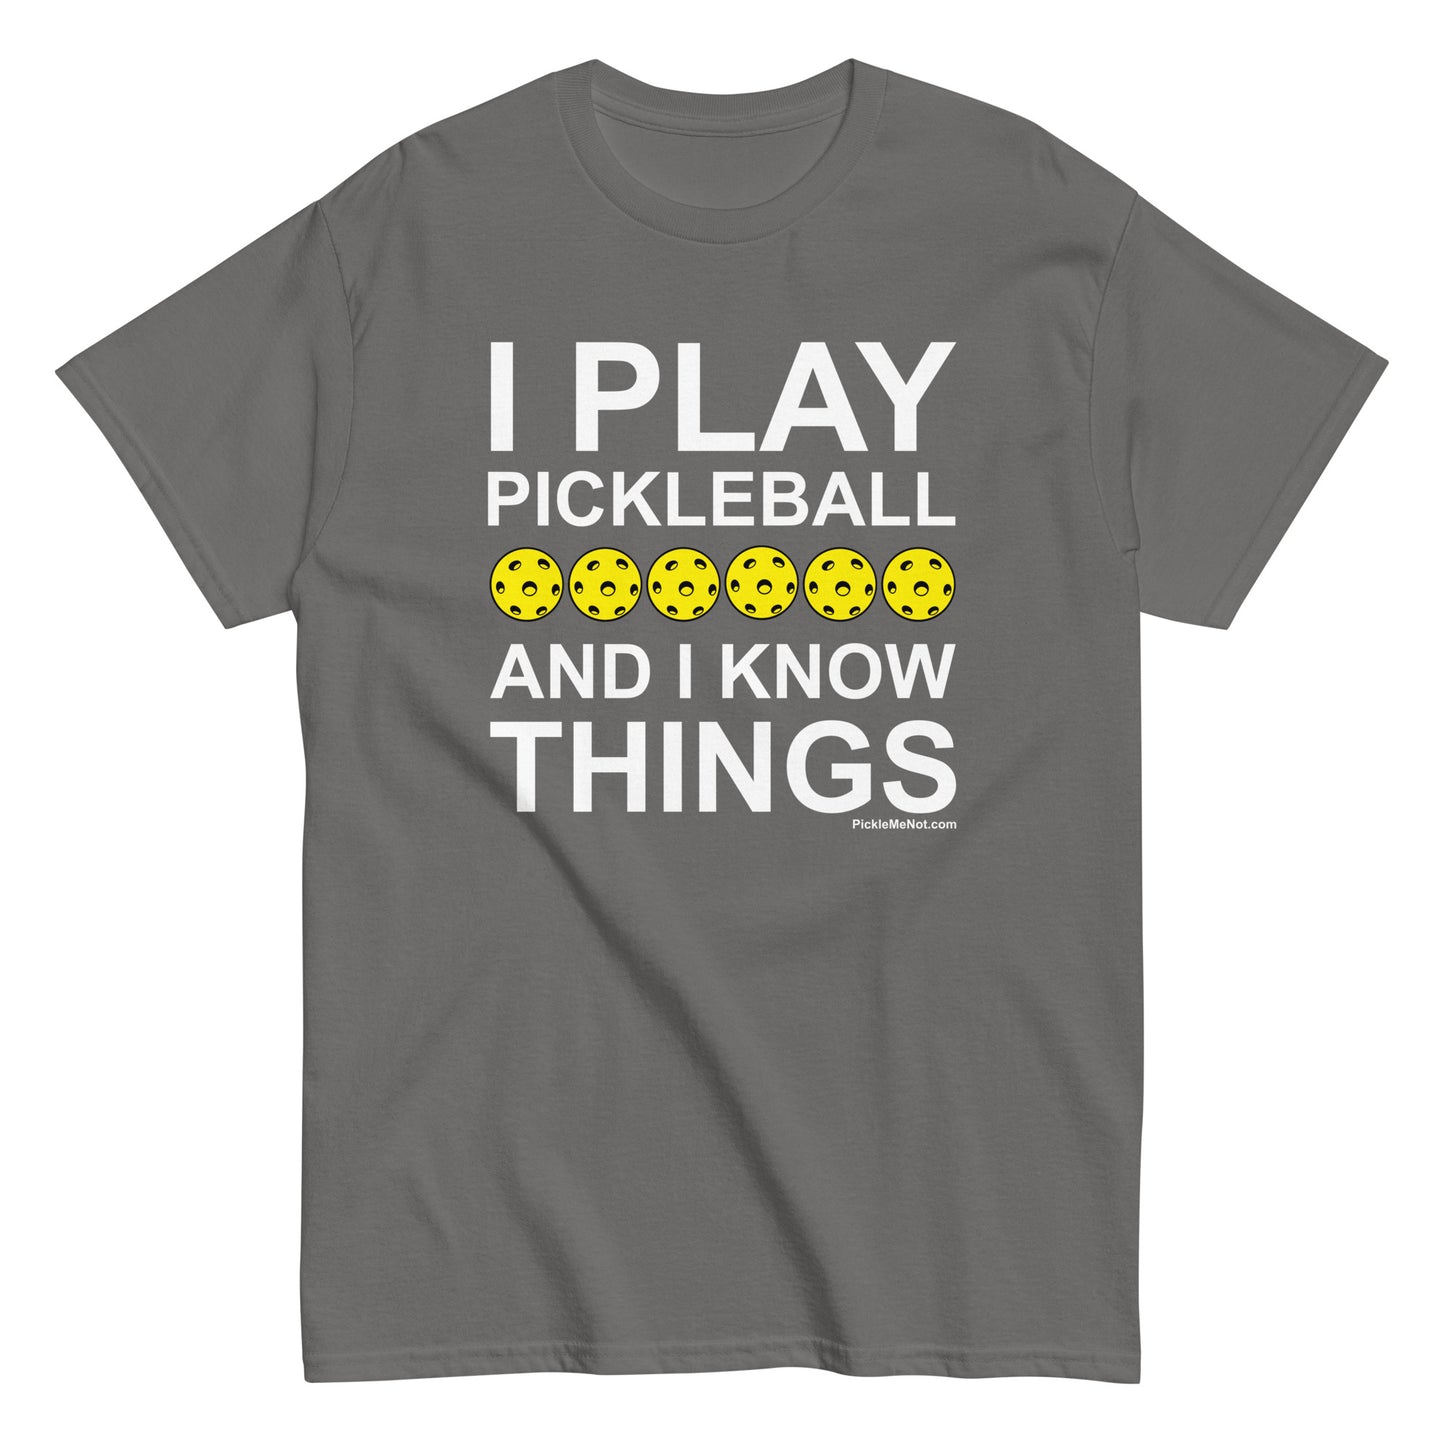 Fun Pickleball, "I Play Pickleball And I Know Things" Men's Classic  Charcoal Tee